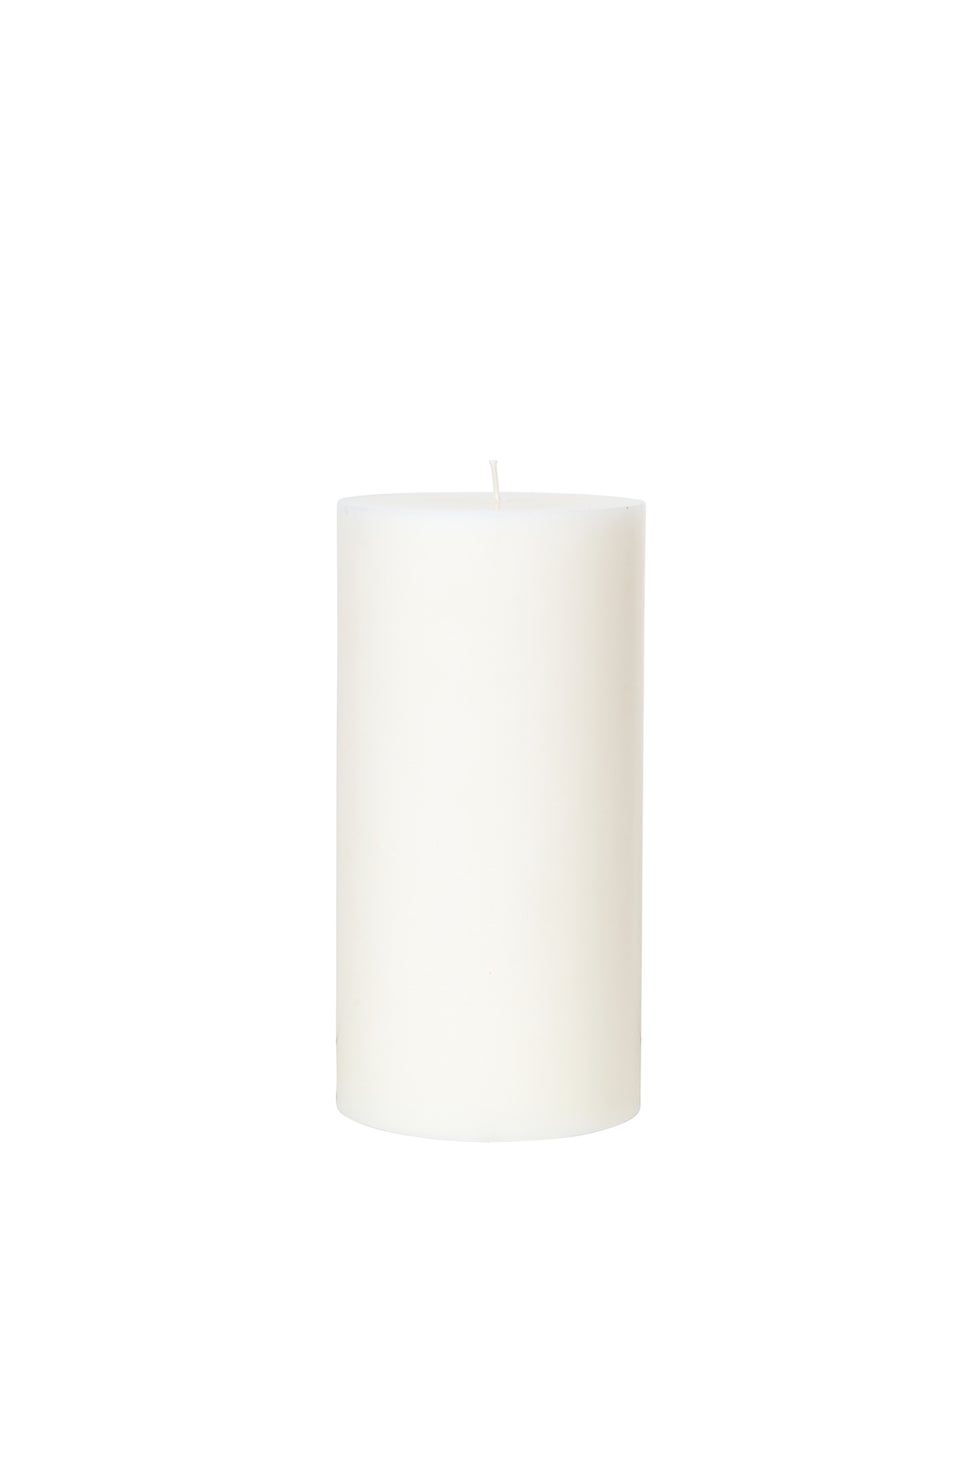 BROSTE Candle Stearin Pure White 10 x 20cm